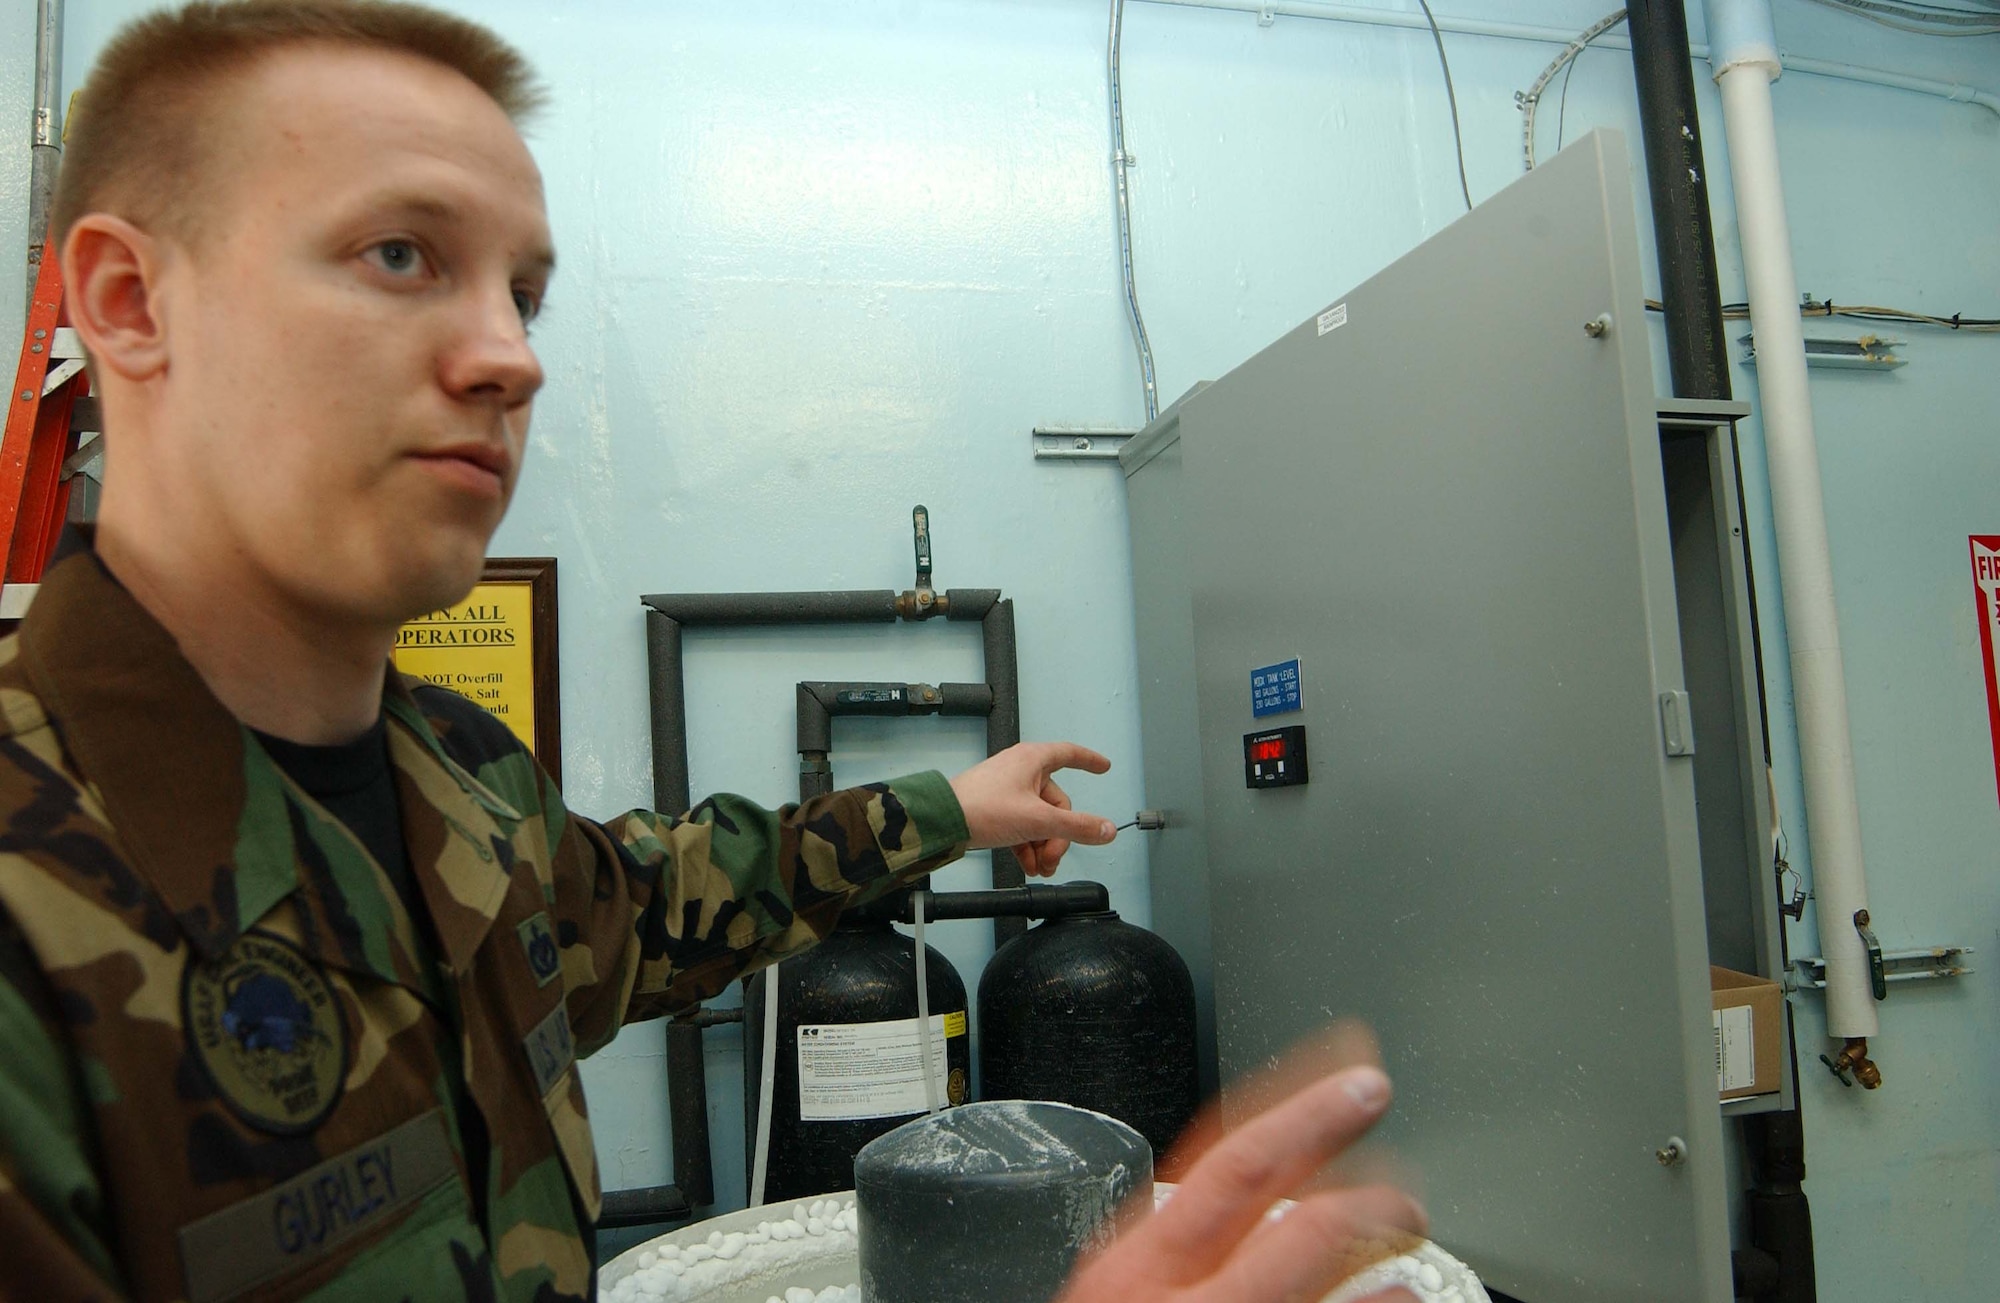 EIELSON AIR FORCE BASE, Alaska -- SSgt Brad Gurley from the Base Water Treatment Plant explains that these numbers indicate the MIOX (mixed oxinate) machine's tank level of disinfectant for the base's water.  If the tank level is below 180 then, the MOX must be turned on, which is all automated.  This is part of a Water Analysis process.  Water Analyis tests for the major elements, Chlorine, Floride, Phosphate, Maganese, Iron, and Ph levels, among many others.  (U.S. Air Force photo by SrA Rachel Walters) 